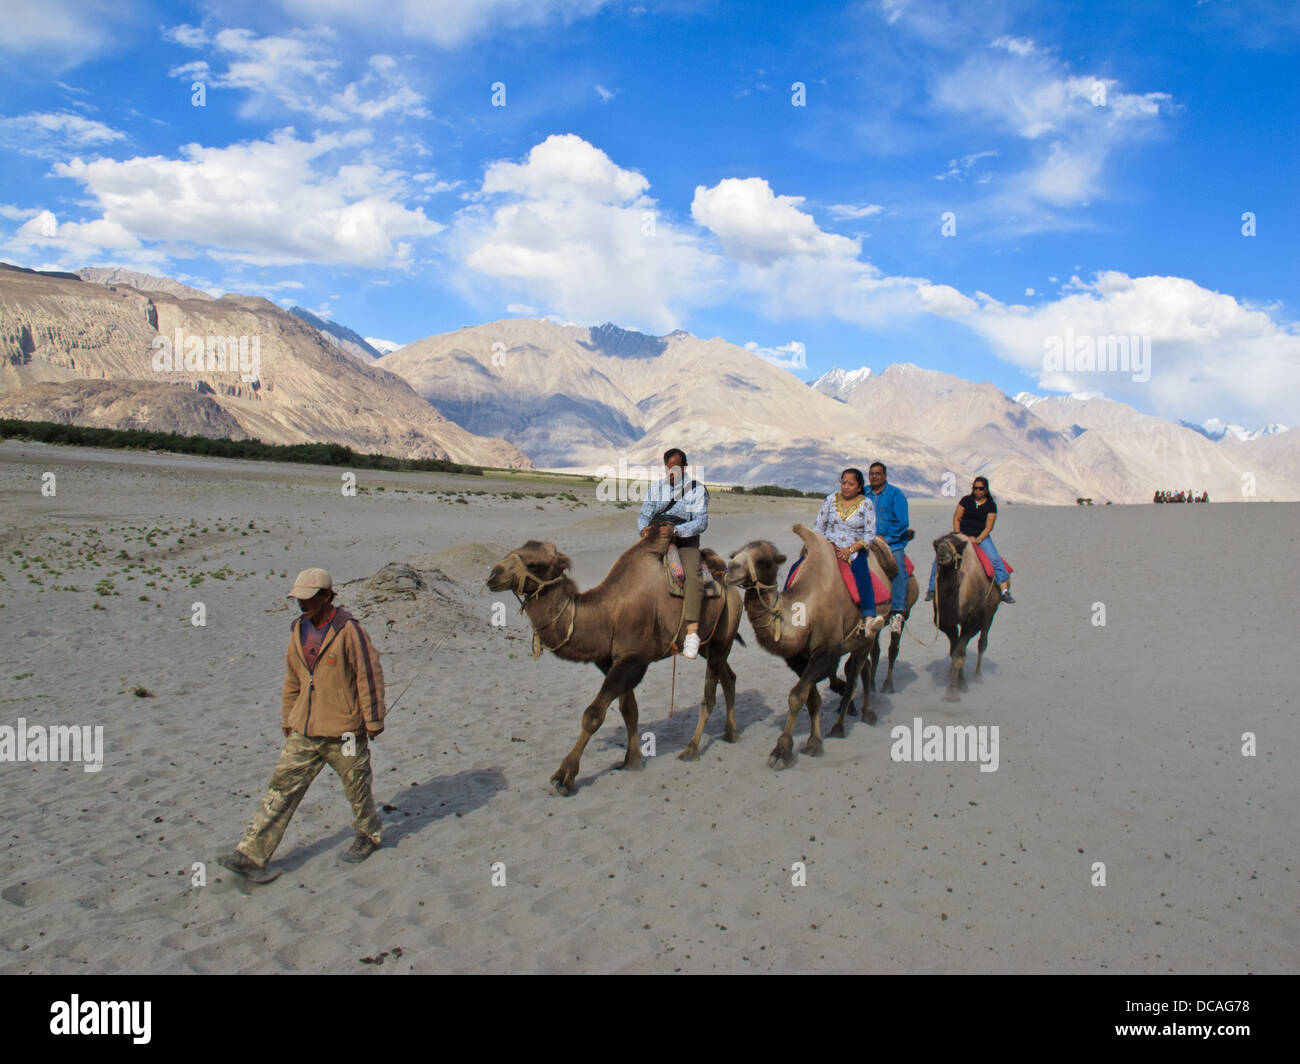 Riding camels exploring sand dune of Nubra valley, another tourist attraction. Stock Photo